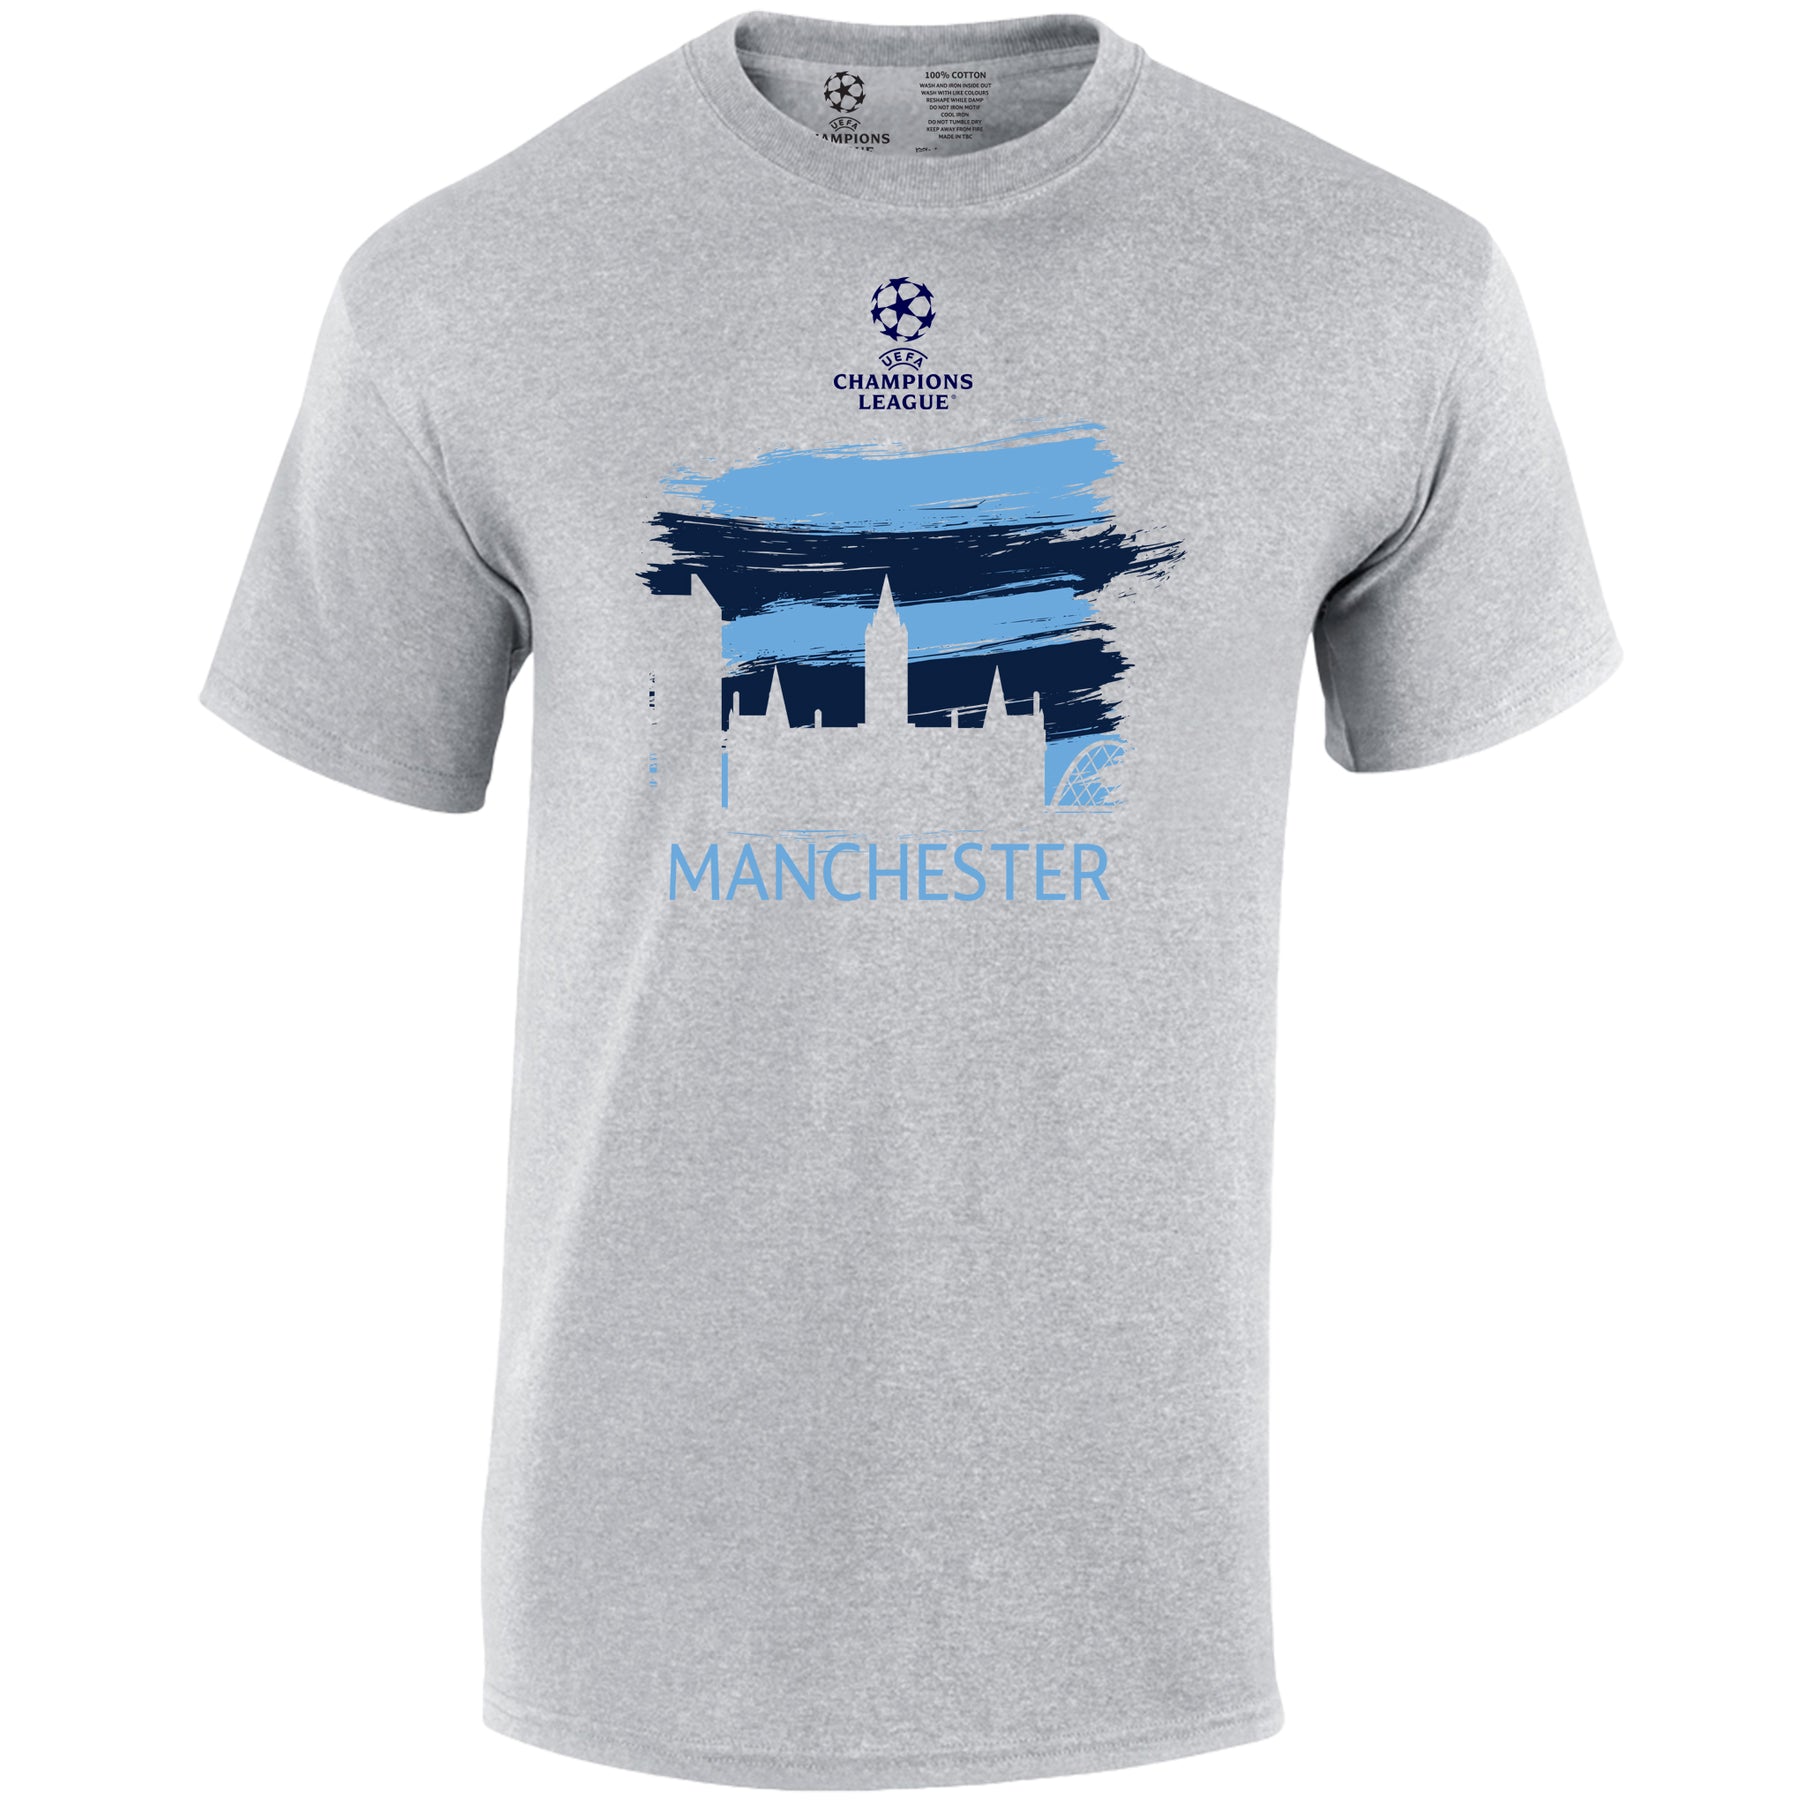 Champions League Manchester City Painted Skyline T-Shirt Grey